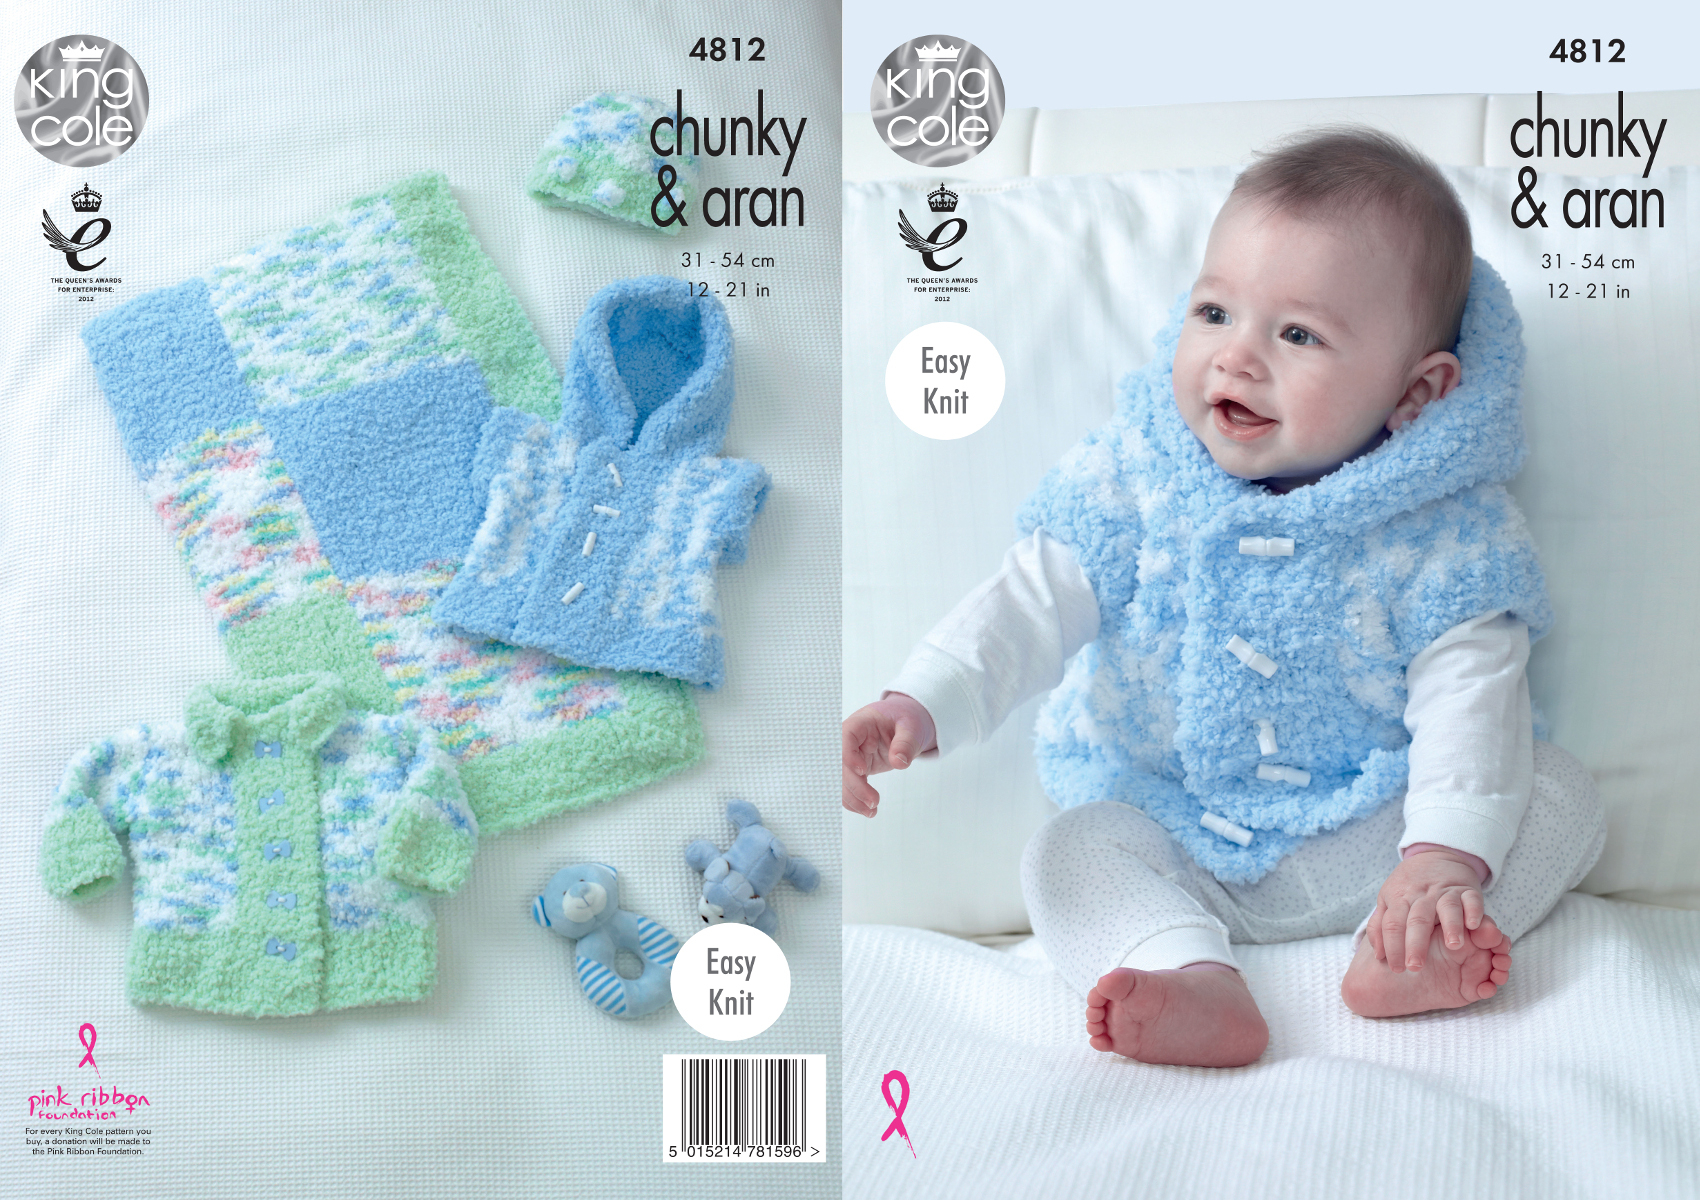 Baby Knitting Patterns Easy Details About Easy Knit Ba Knitting Pattern Jacket Gilet Hat Blanket King Cole Chunky 4812